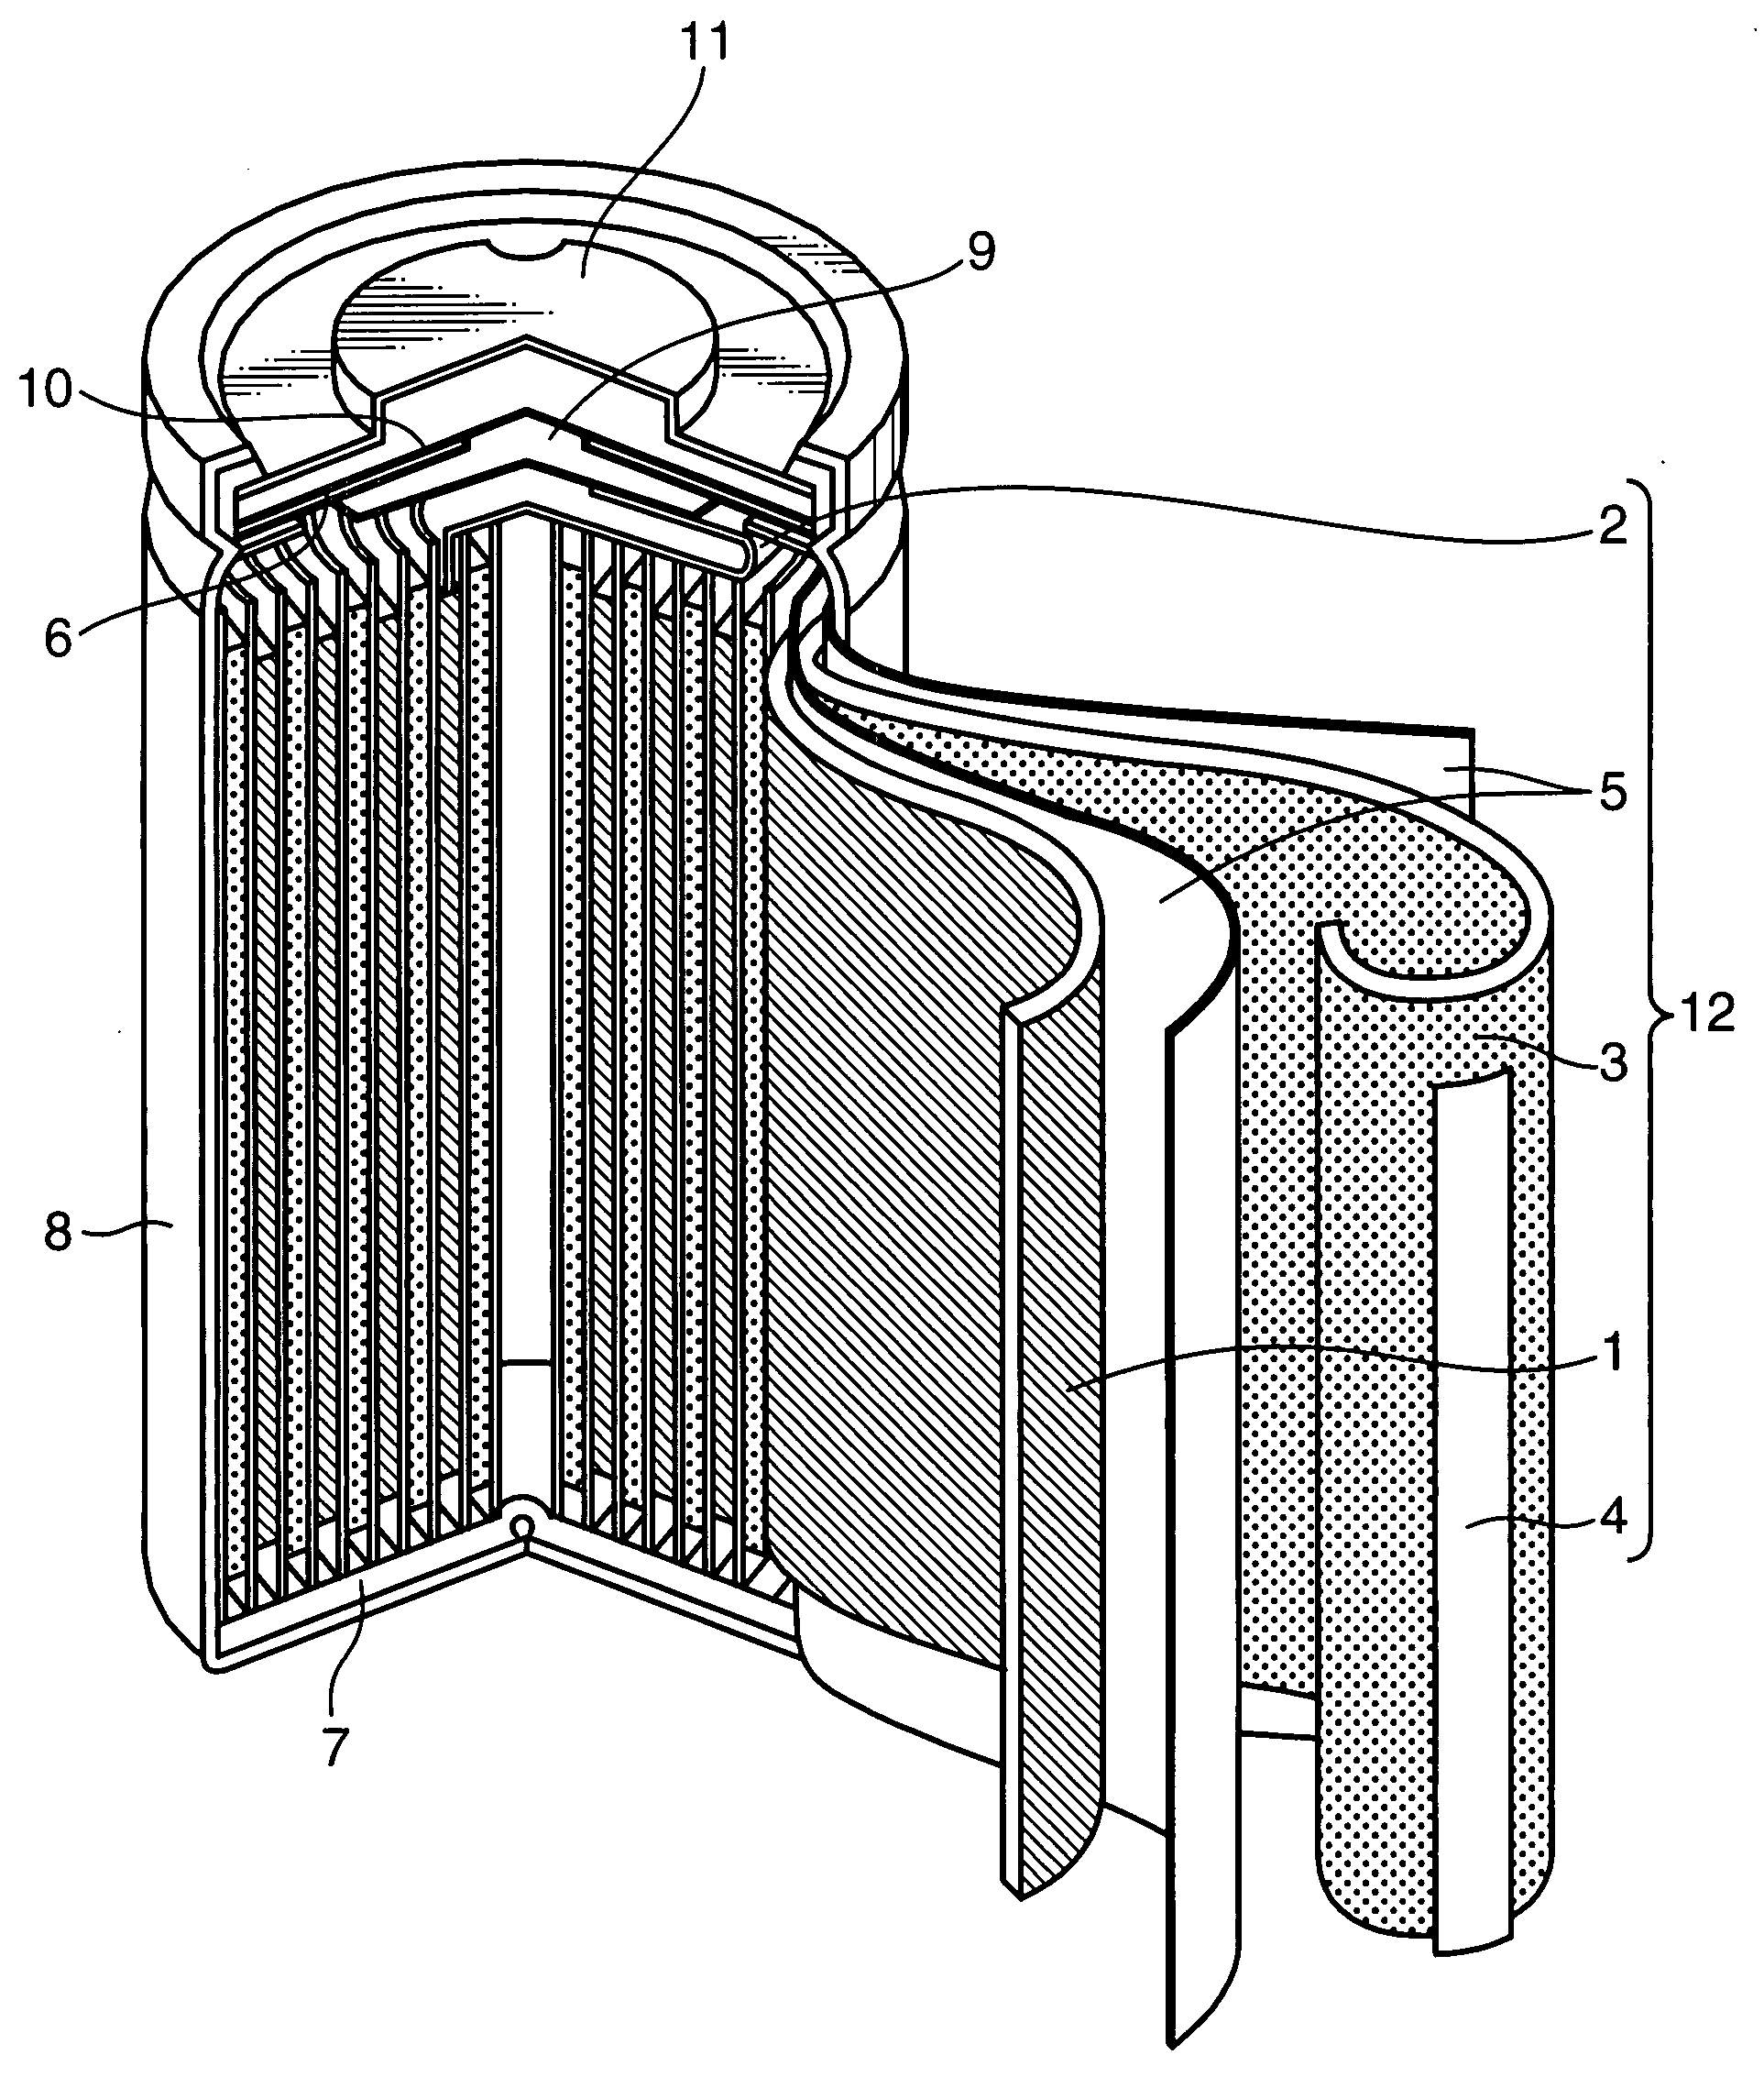 Nonaqueous electrolyte secondary battery and method of producing the same